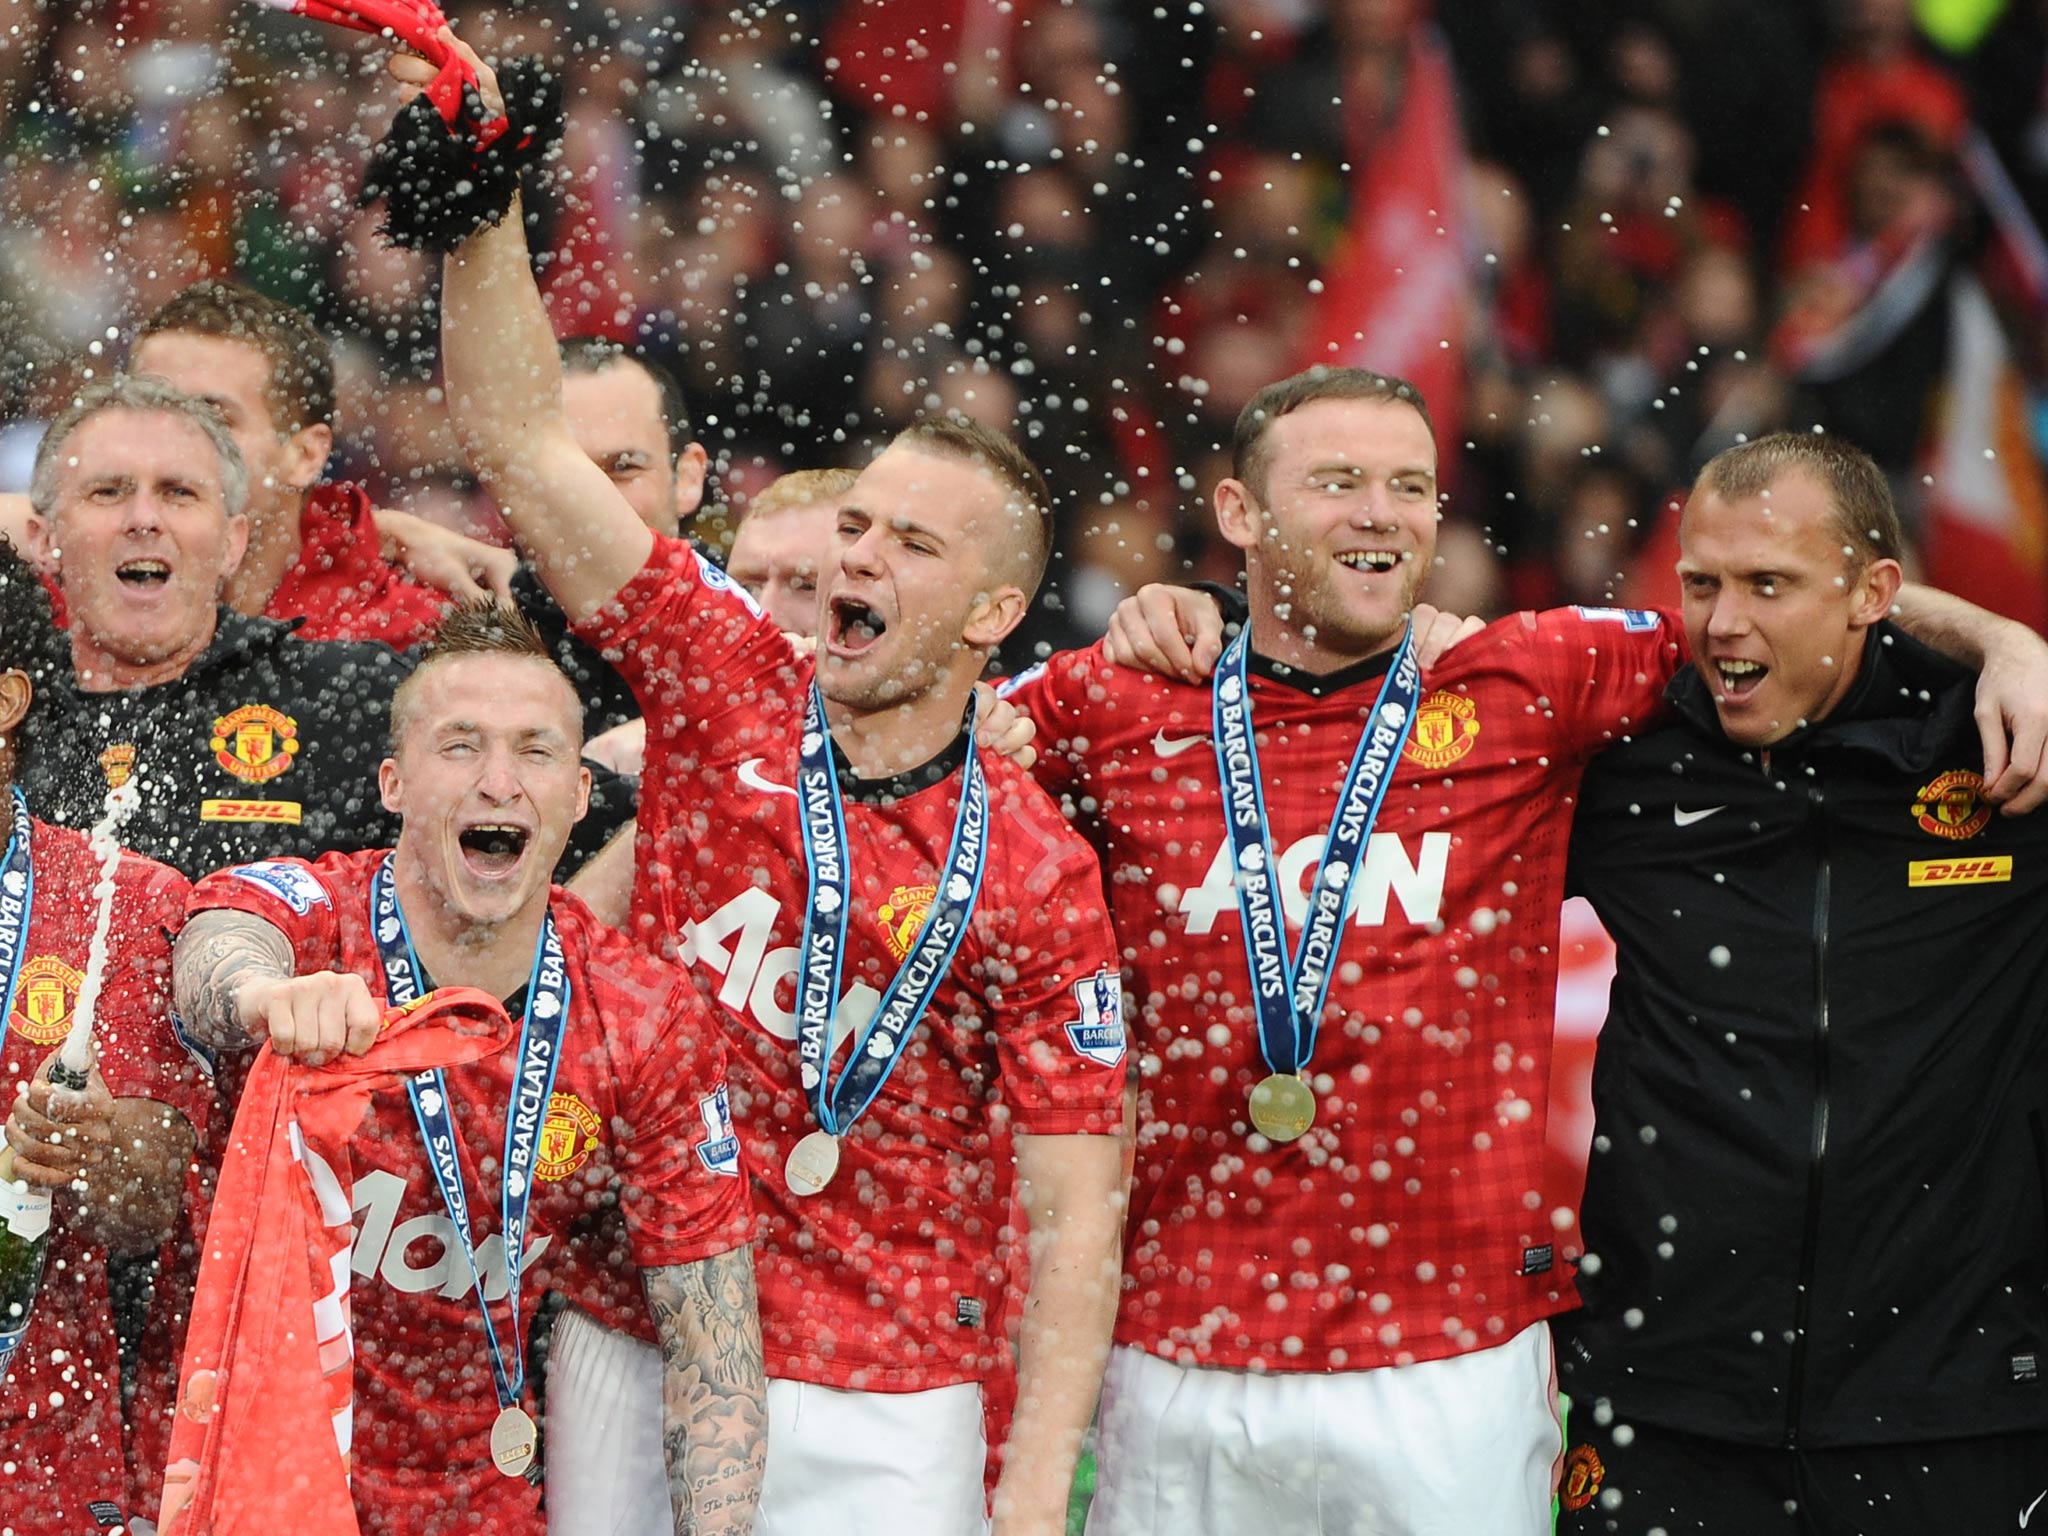 Wayne Rooney celebrates Manchester United's success with Alexander Buttner, and Tom Cleverley